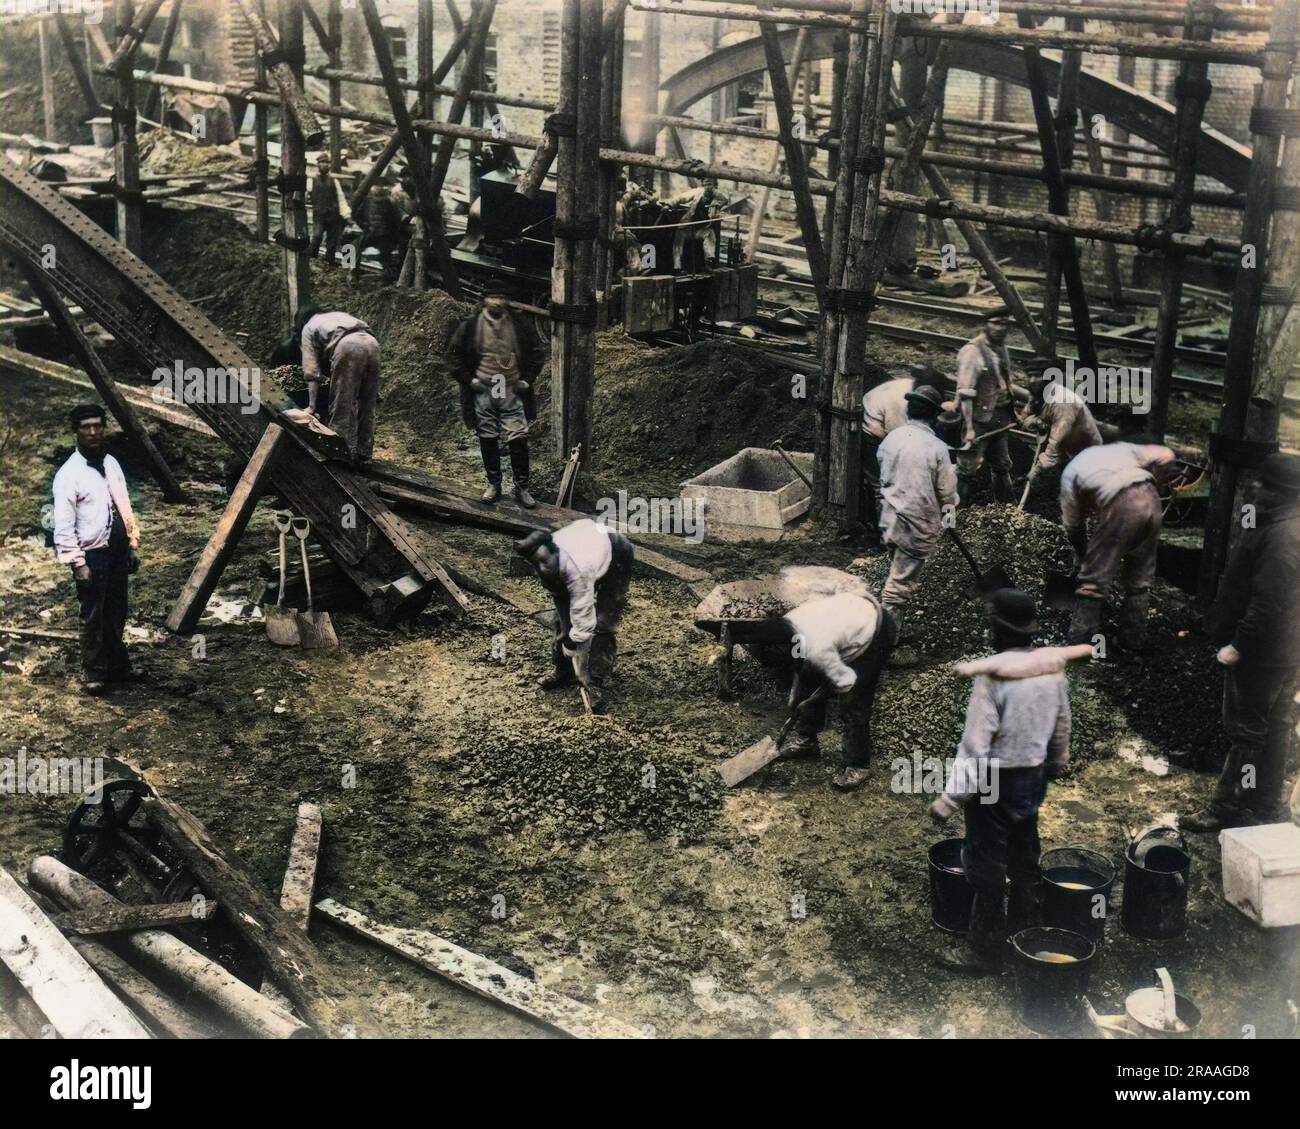 A group of navvies working on an elevated section of an inner London railway.     Date: 19th century Stock Photo